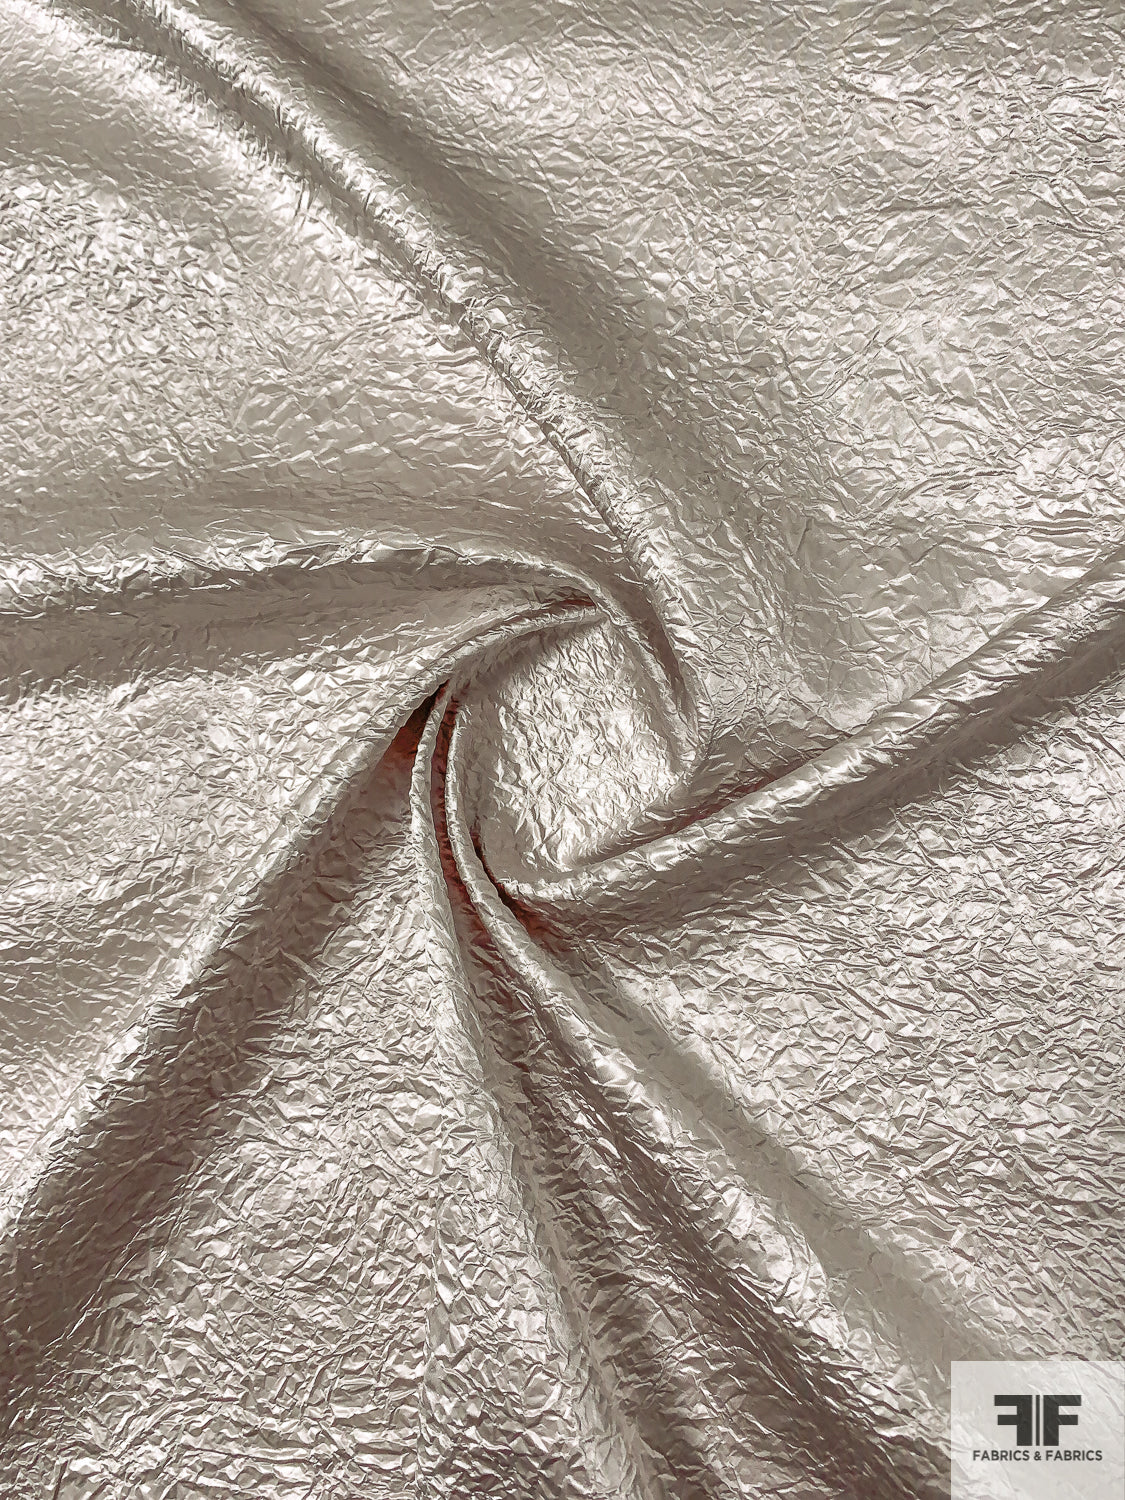 Metallic Hammered Poly Blend Stretch Satin - Light Silver/Grey - Fabric by  the Yard